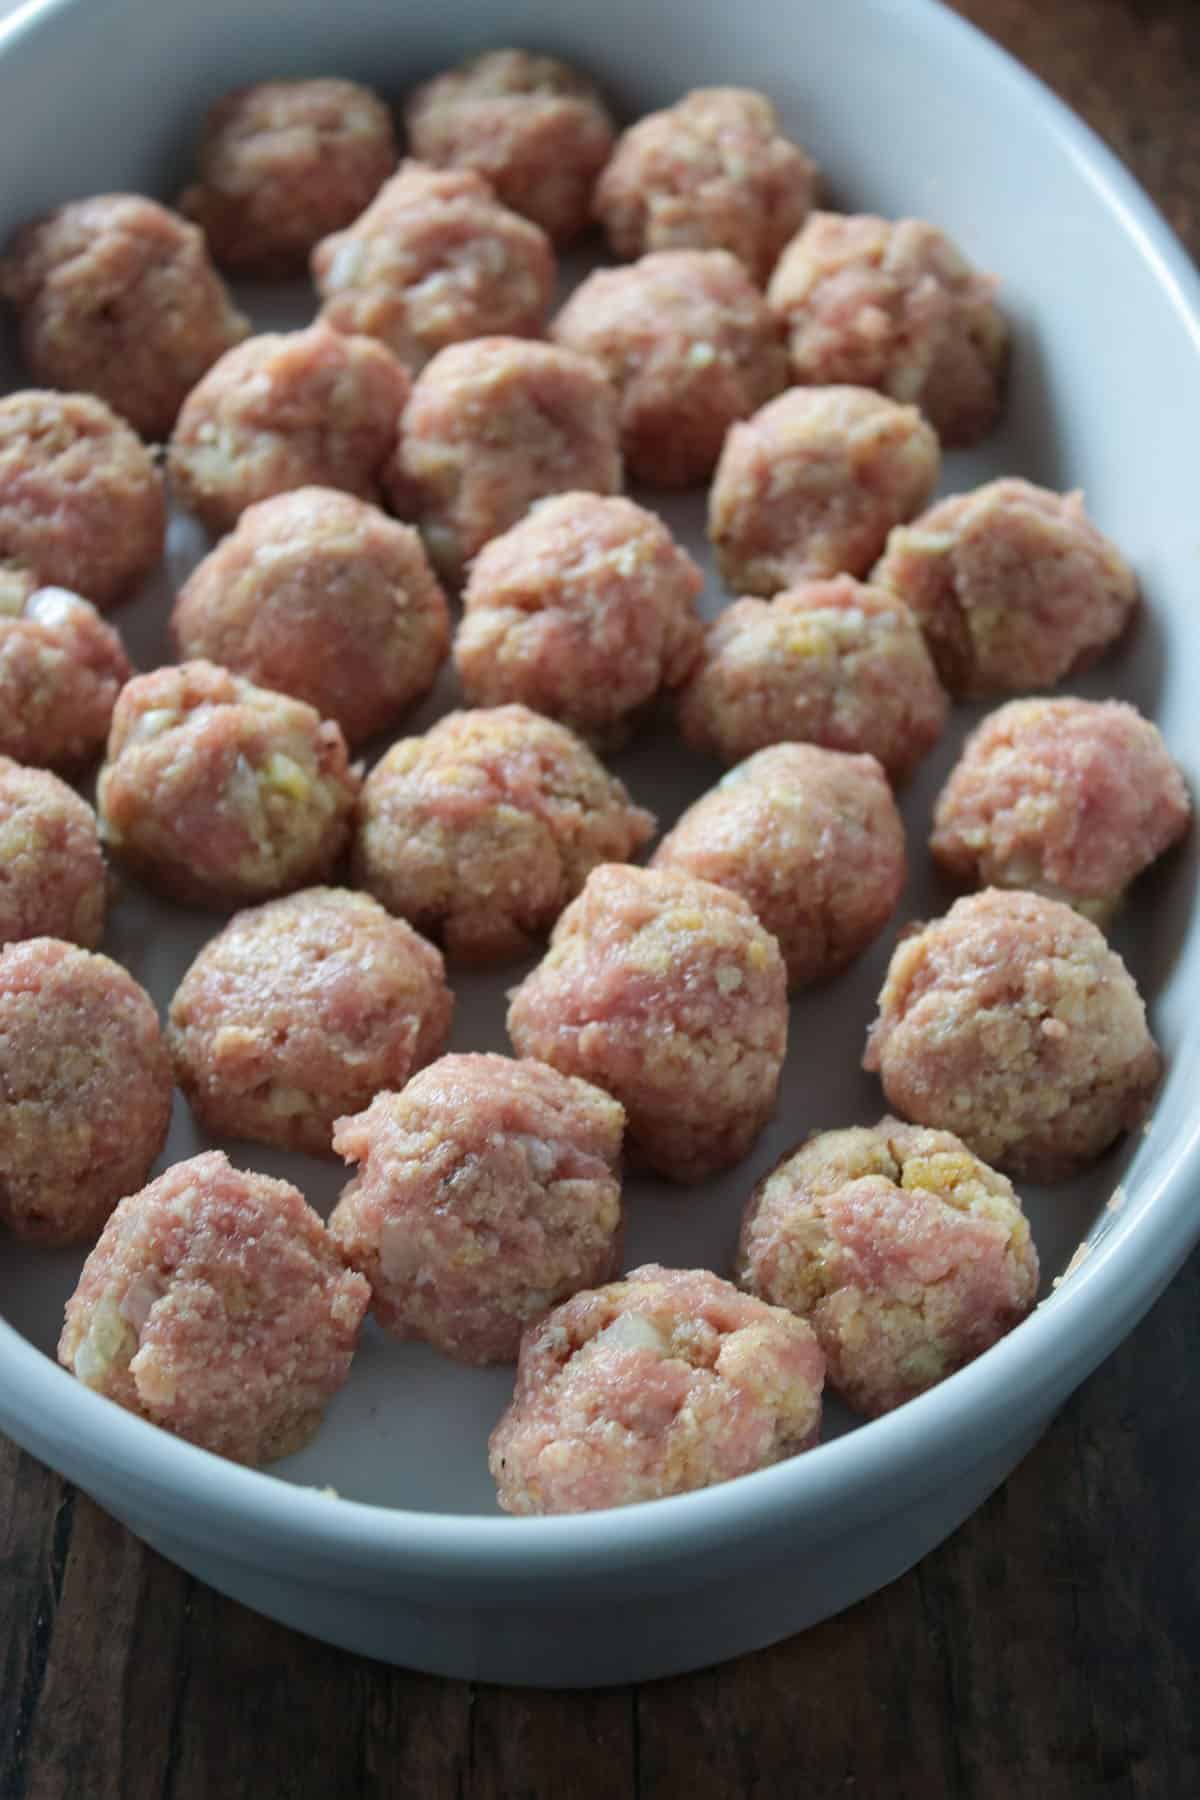 The shaped meatballs prior to baking,